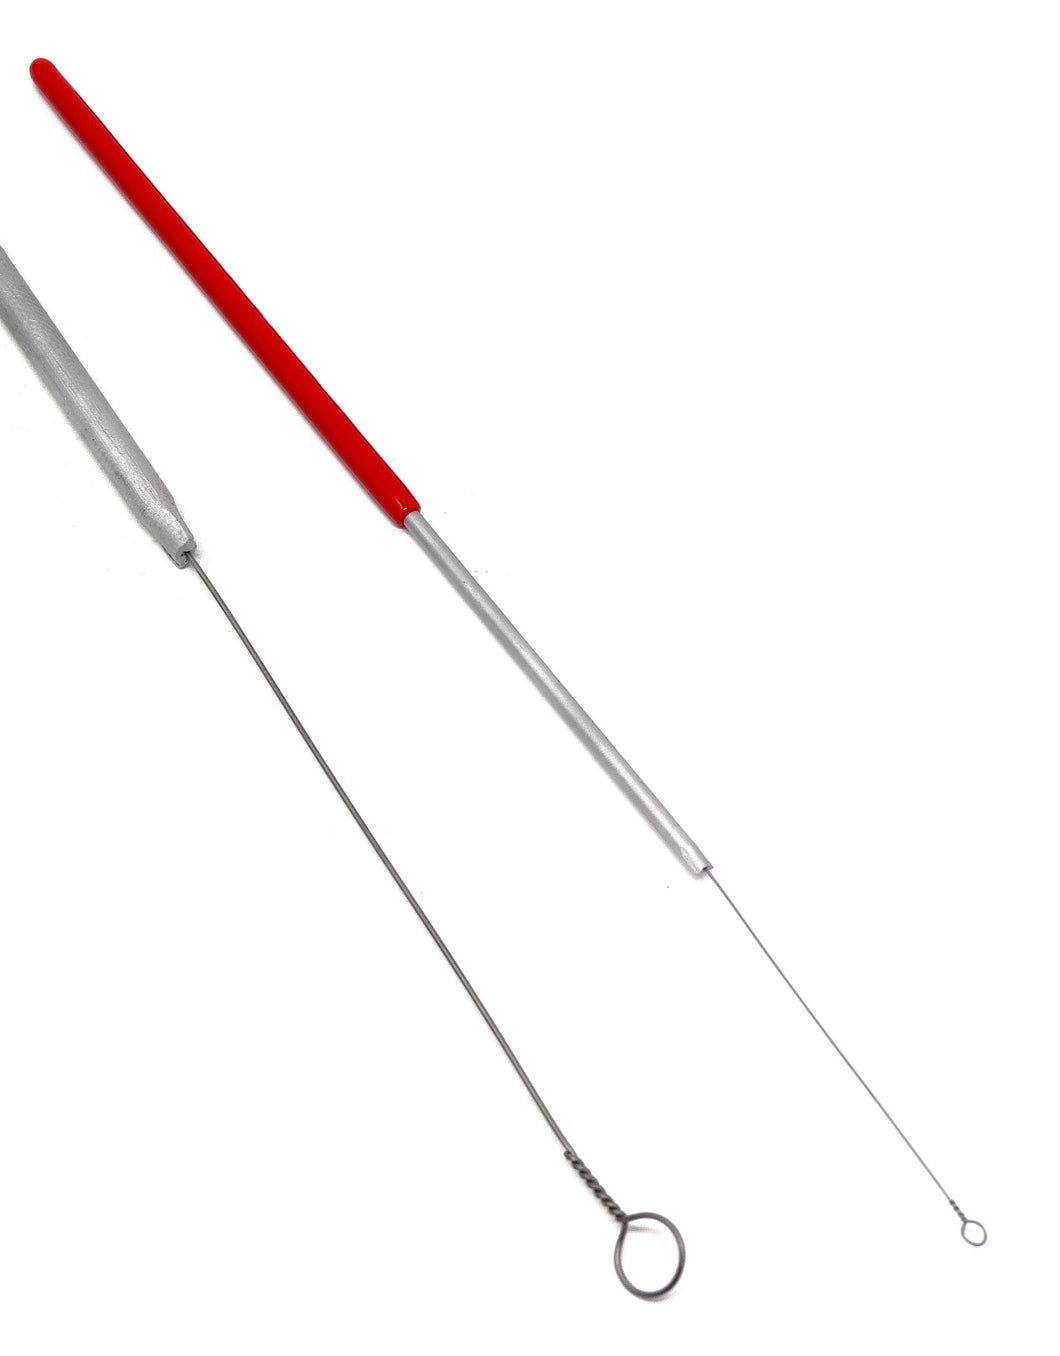 A2ZSCILAB Bacterial Inoculating Loop 3 mm, Single Nichrome Wire, With Insulated Aluminum Handle